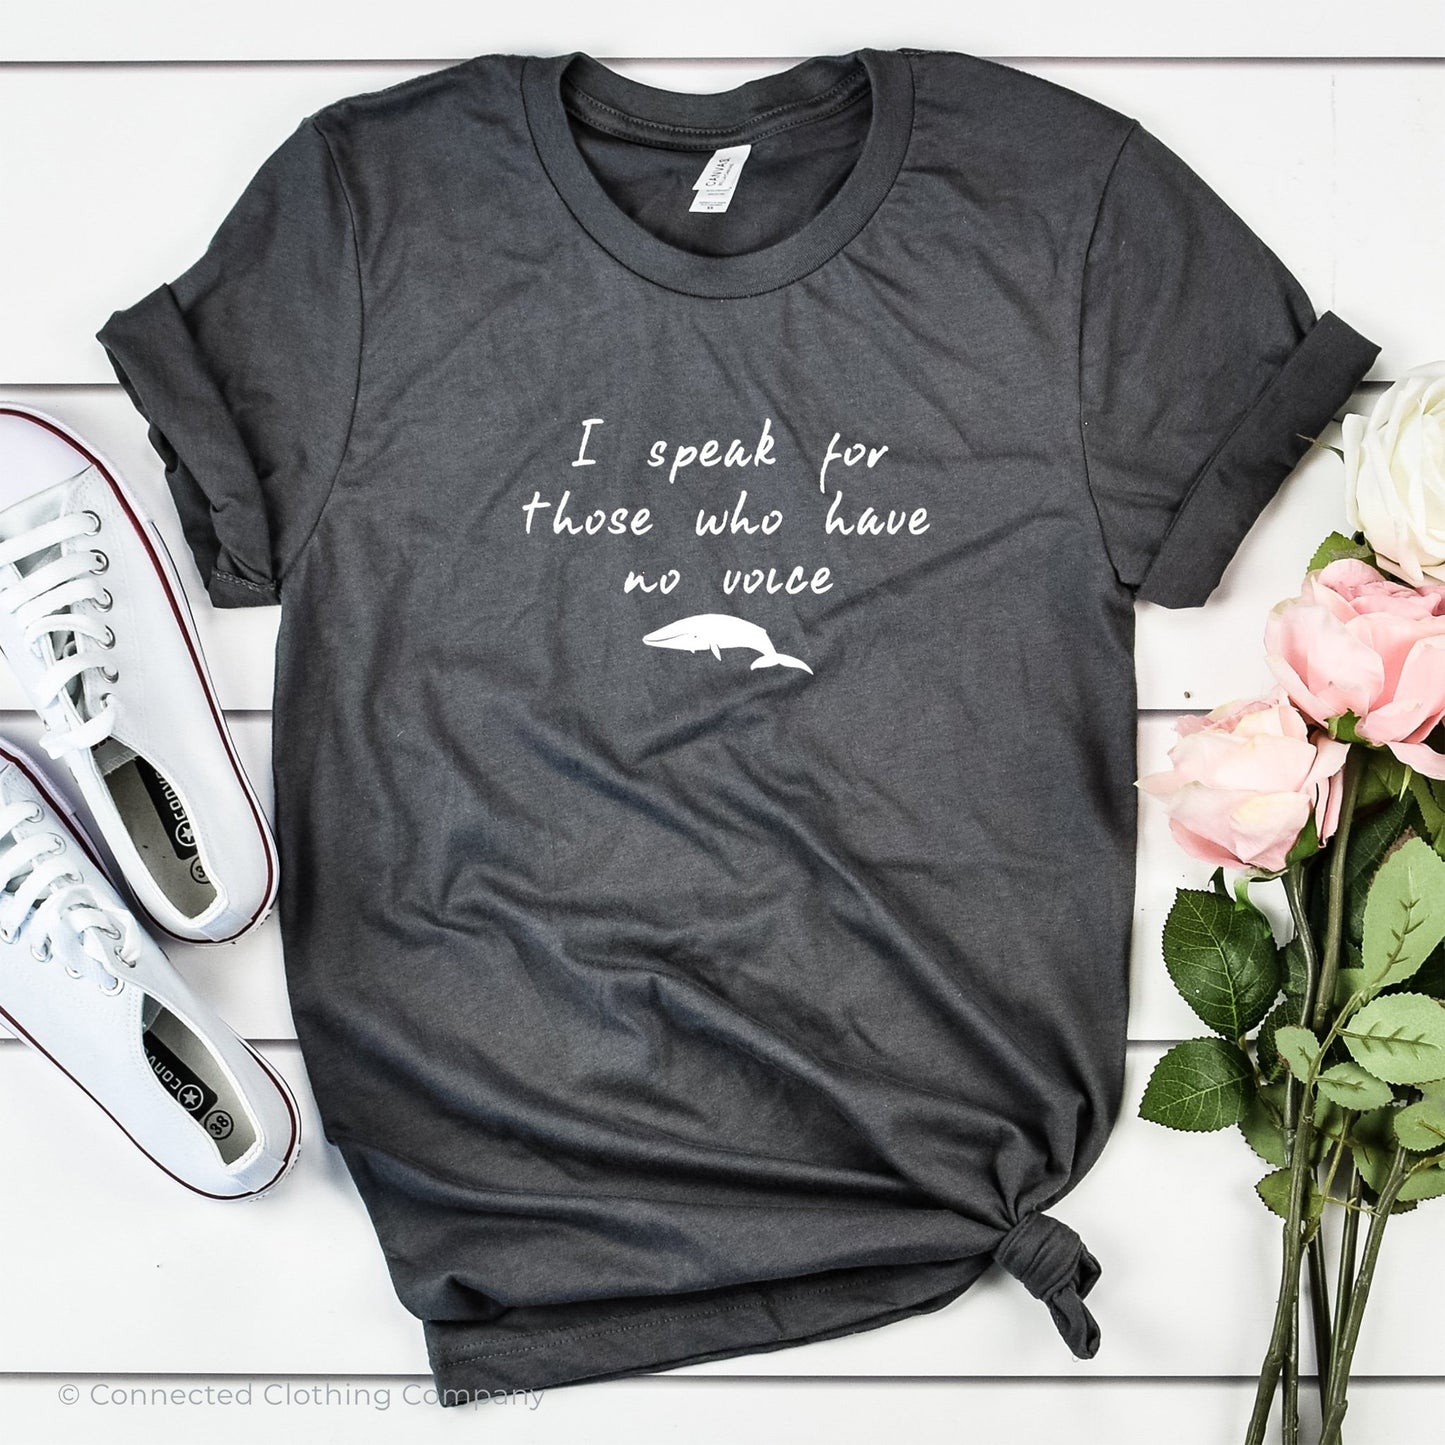 Be The Voice Whale Unisex Short-Sleeve Tee in Asphalt - sweetsherriloudesigns donates 10% of the profits from this t-shirt to Mission Blue ocean conservation